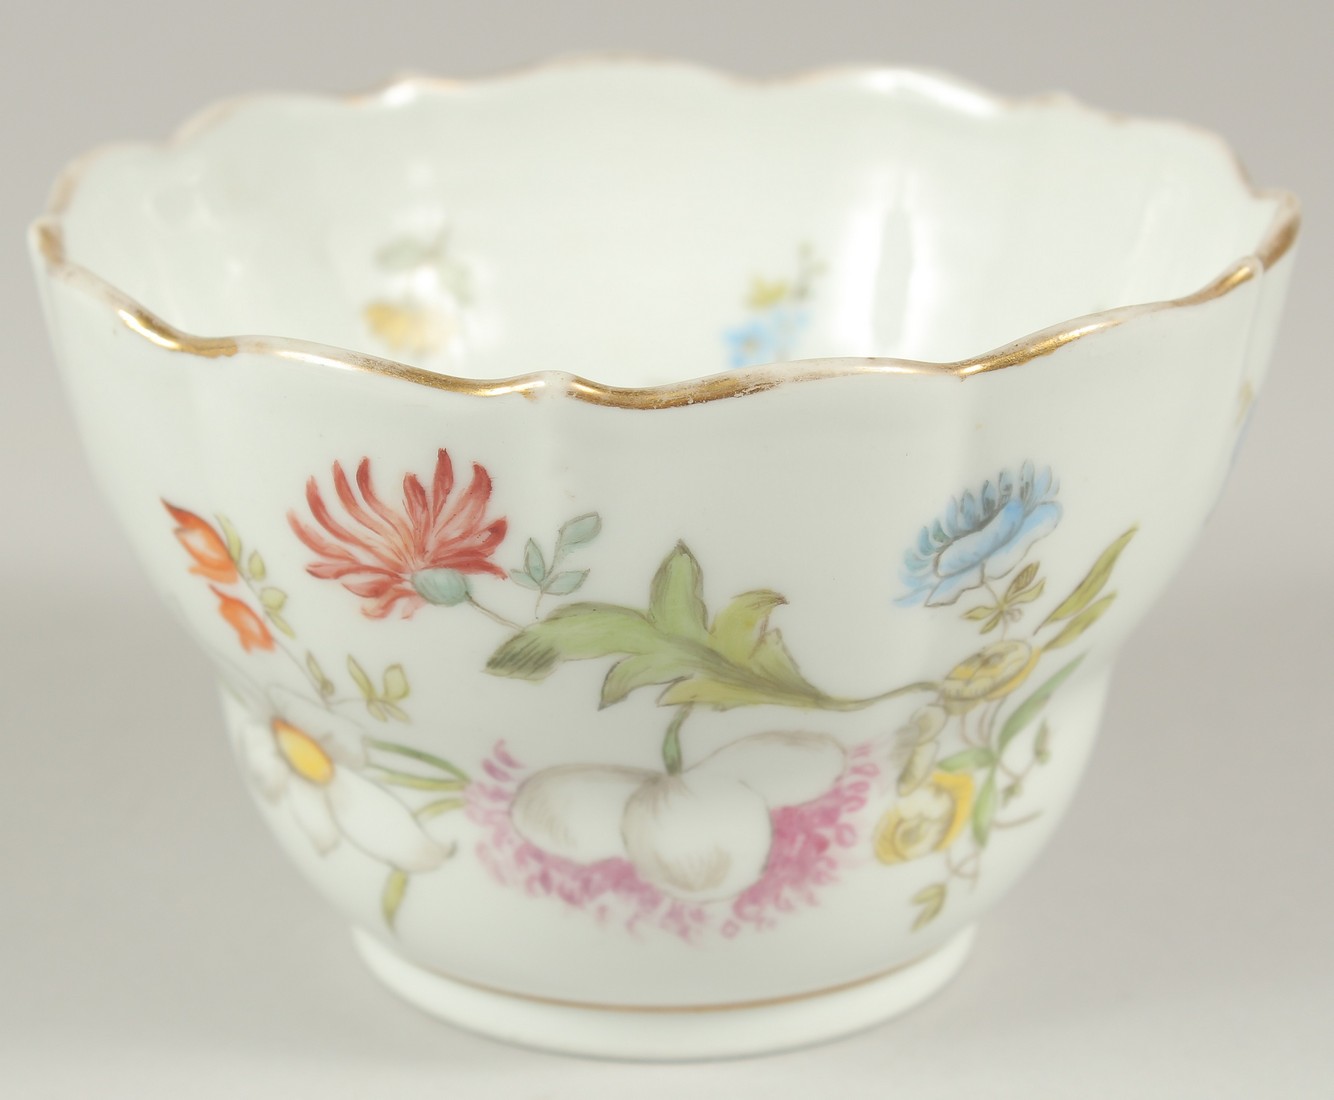 A MEISSEN PORCELAIN CIRCULAR BOWL, white ground and painted with flowers. 4.5ins diameter. Cross